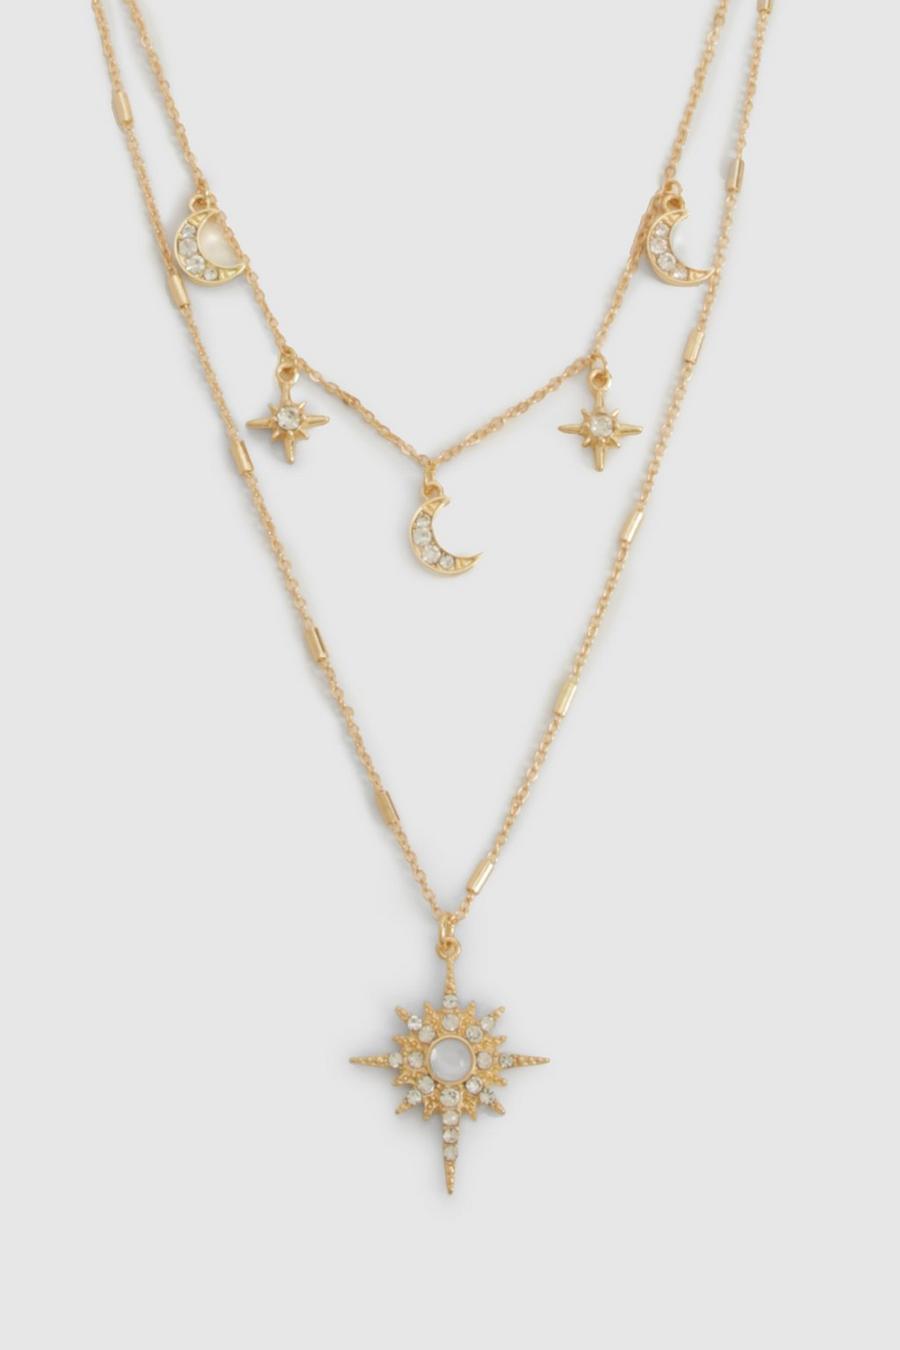 Gold Celestial Double Chain Necklace